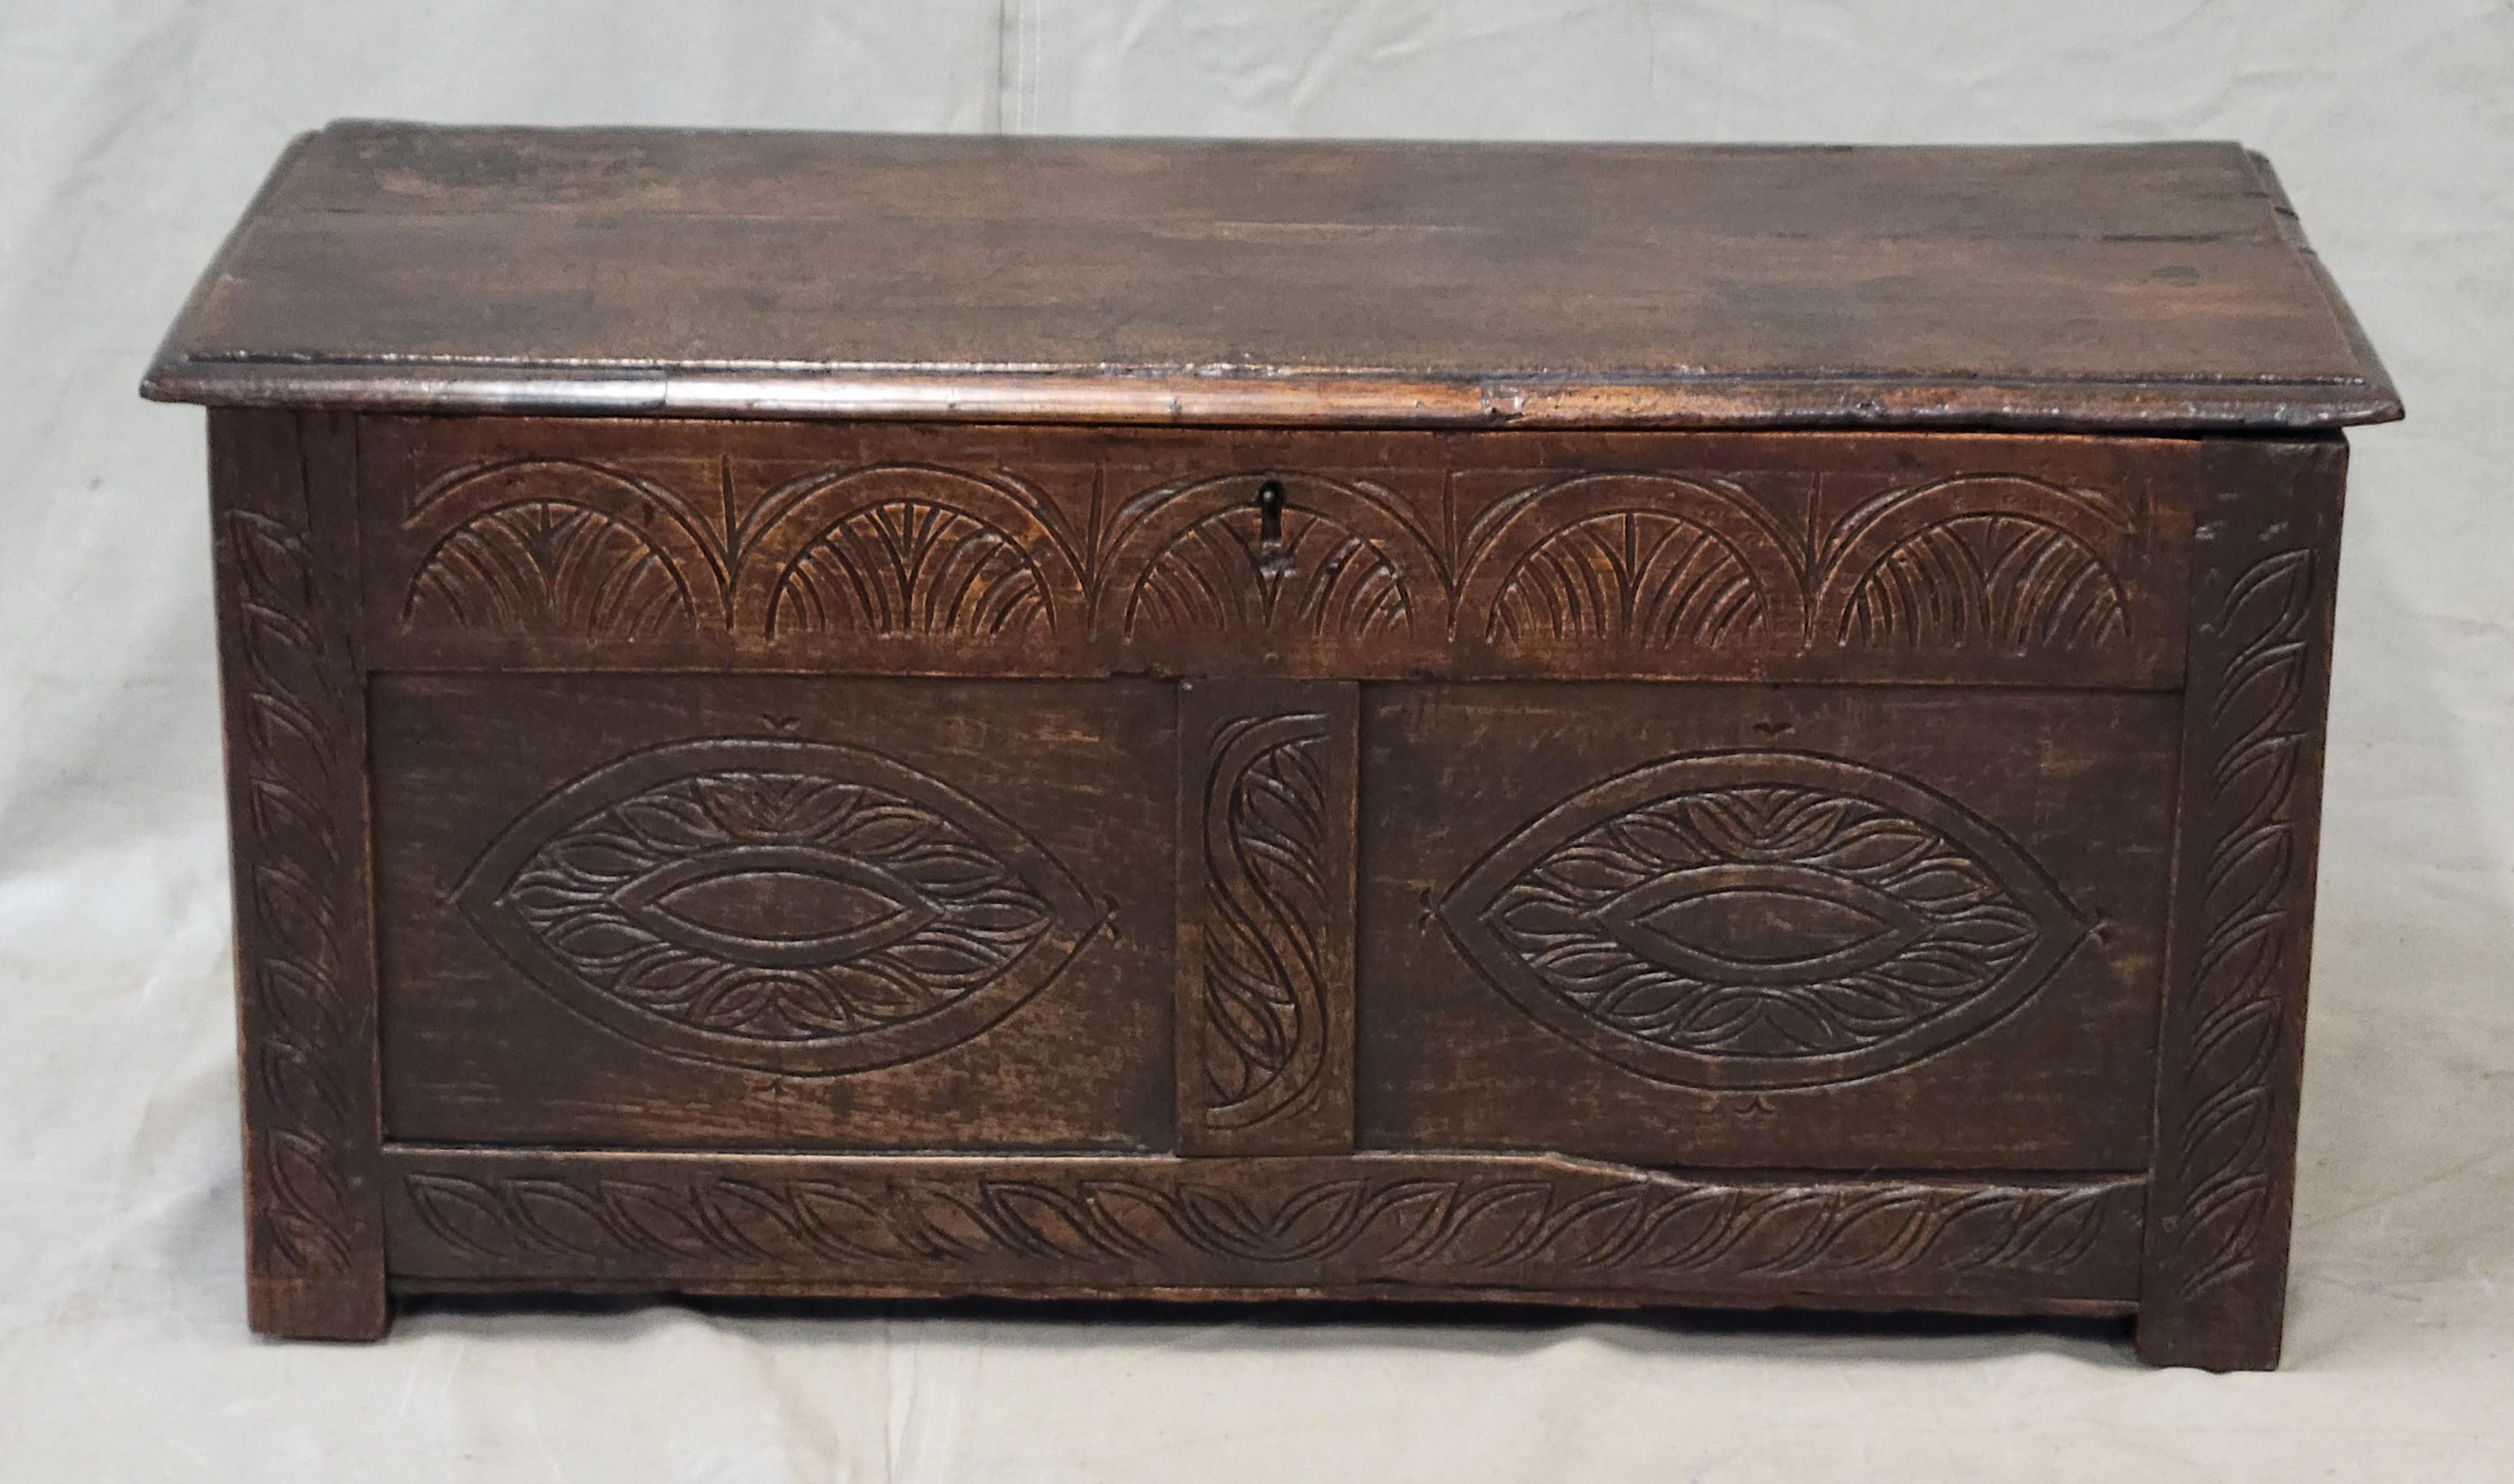 A beautiful, classic 19th century English carved oak storage trunk or coffer. Incised decorative carved patterns in the front. It could be used as a coffee table, at the foot of a bed for storage, or in a hallway or entryway for seating and storage.